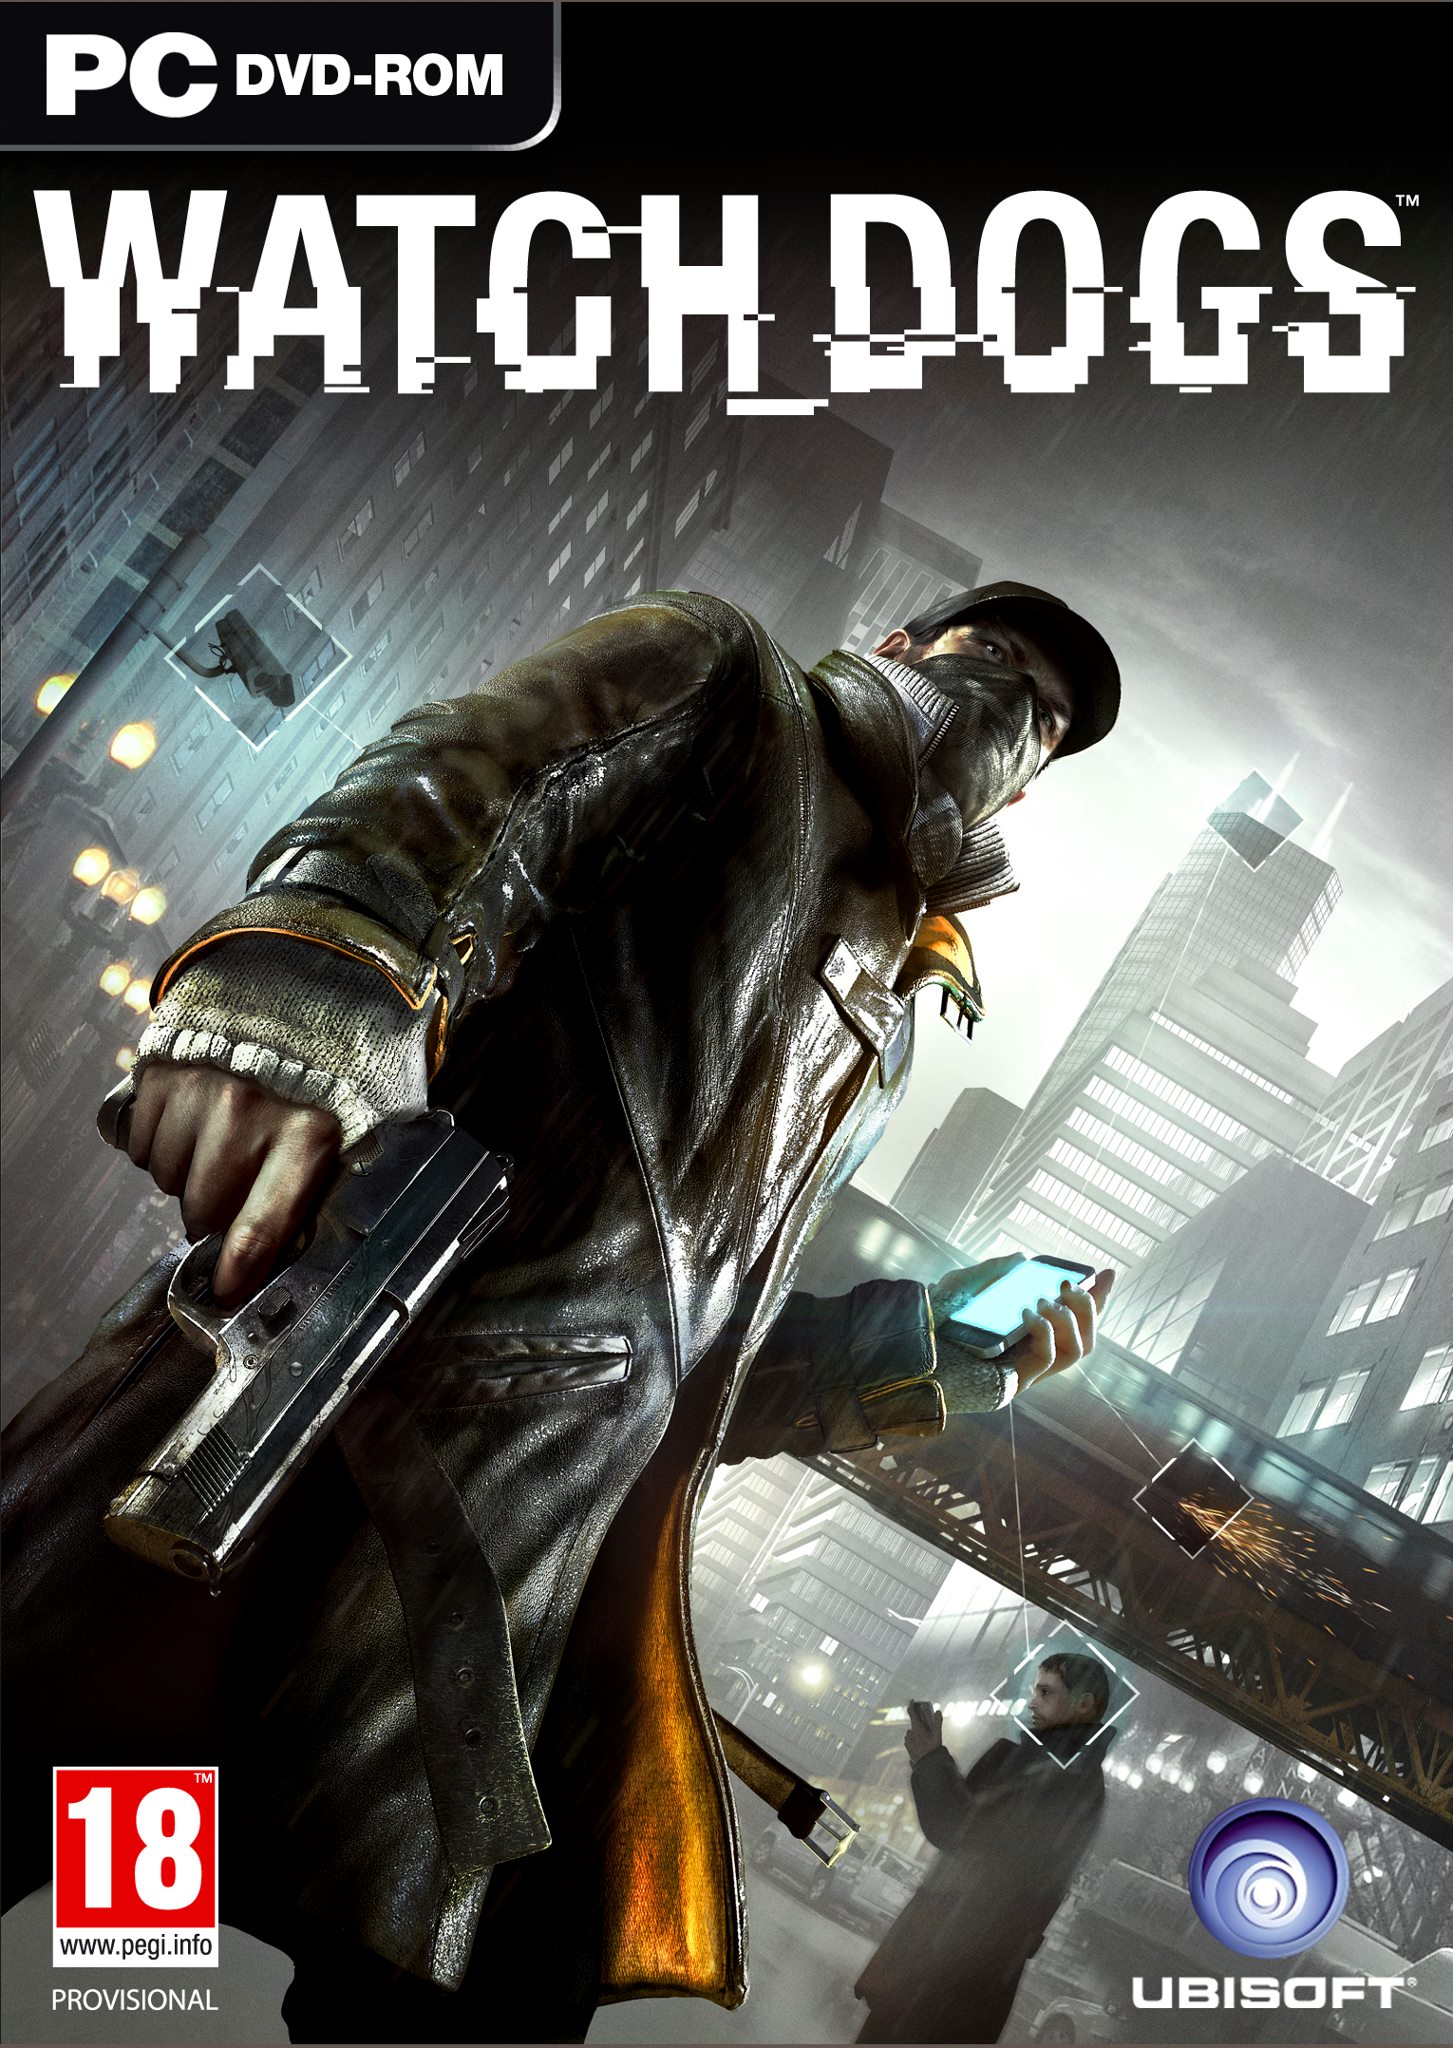 Watch Dogs русификатор (Звук/текст)